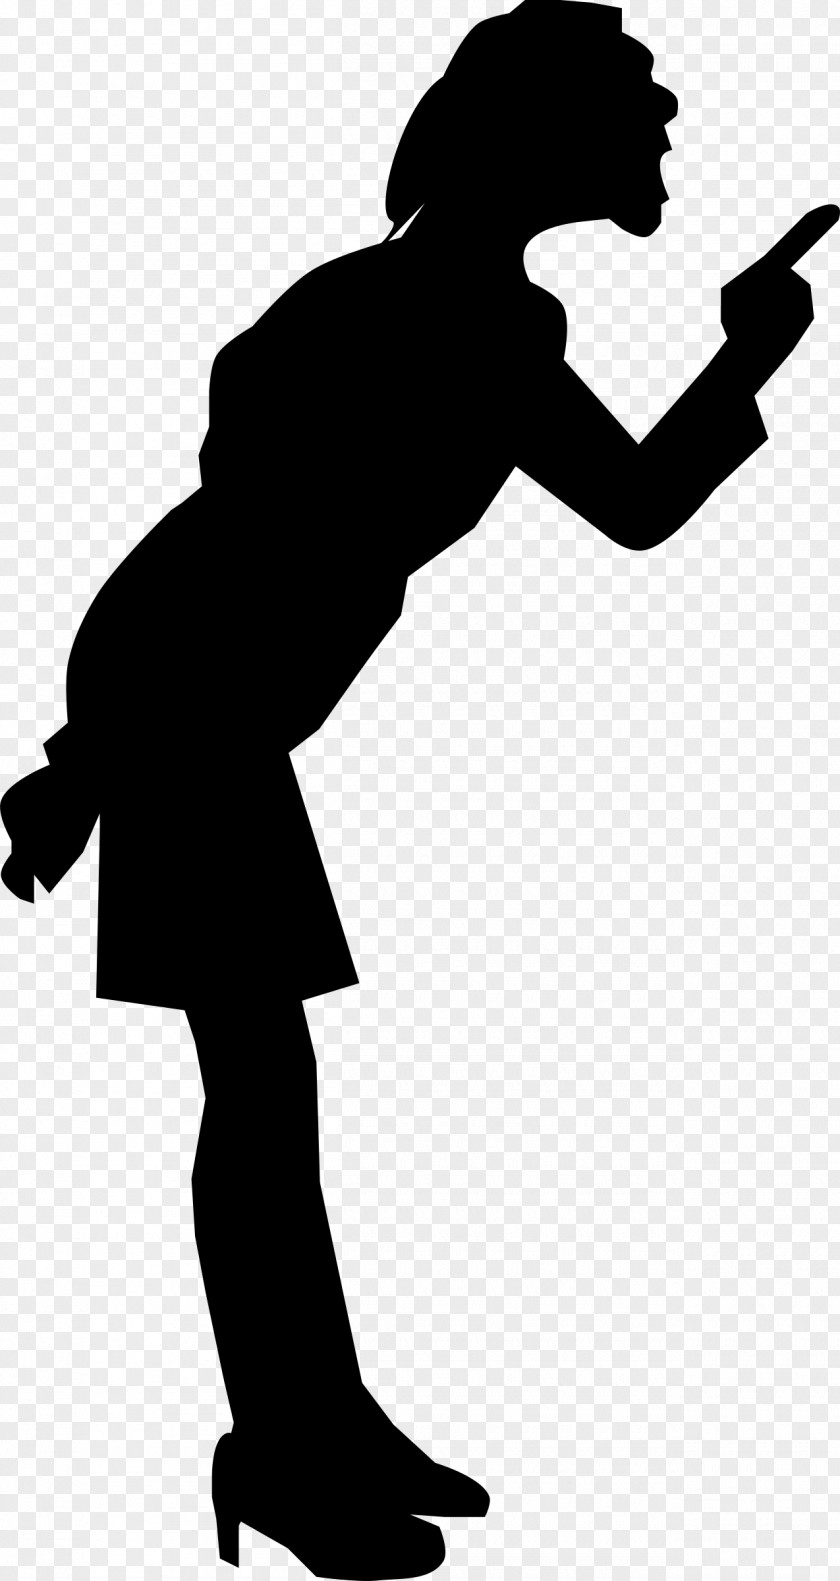 Angry Silhouette Screaming Clip Art PNG